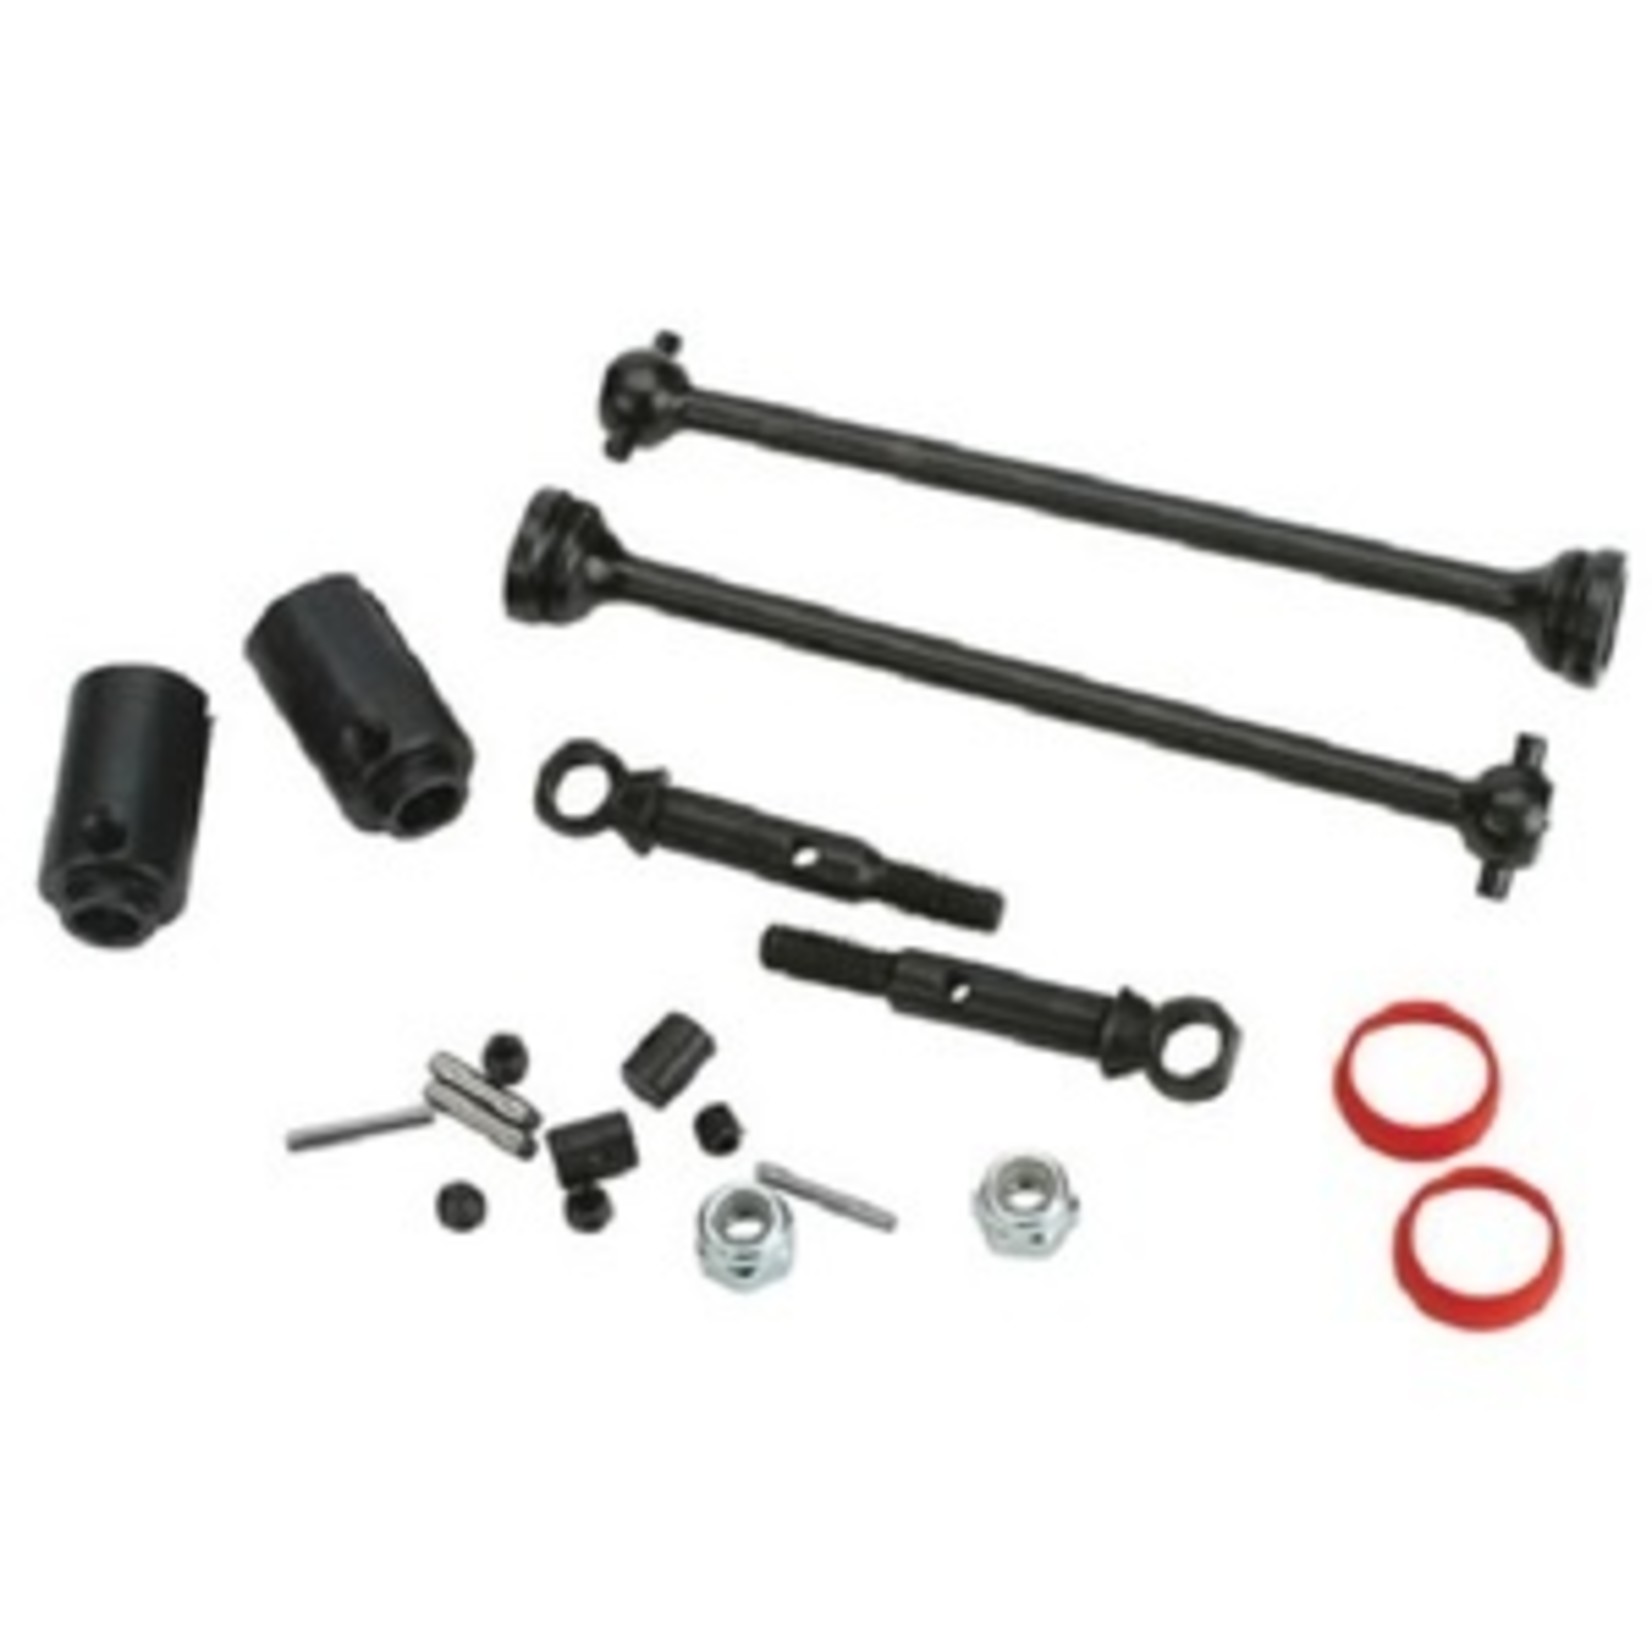 MIP - Moore's Ideal Products MIP8106  C-CVD Kit for Slash/Nitro Rustler and Stampede